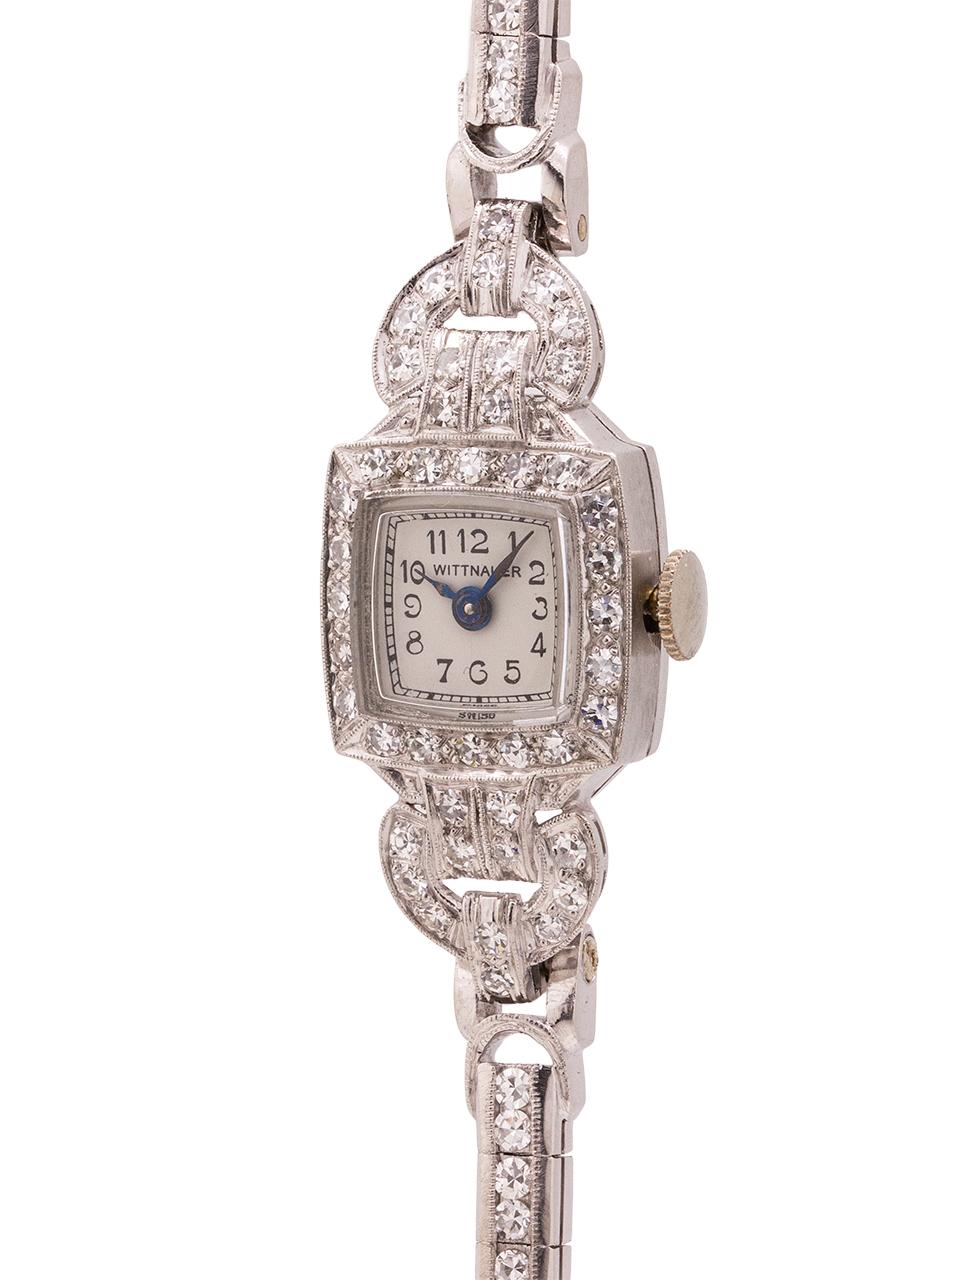 
An especially pretty design, lady Wittnauer diamond encrusted hinged platinum case lady circa 1940’s. Featuring a square shaped case surrounded in diamonds, highlighted with 2 diamond set “lugs” fixed to the the body of the case. With pleasing snow